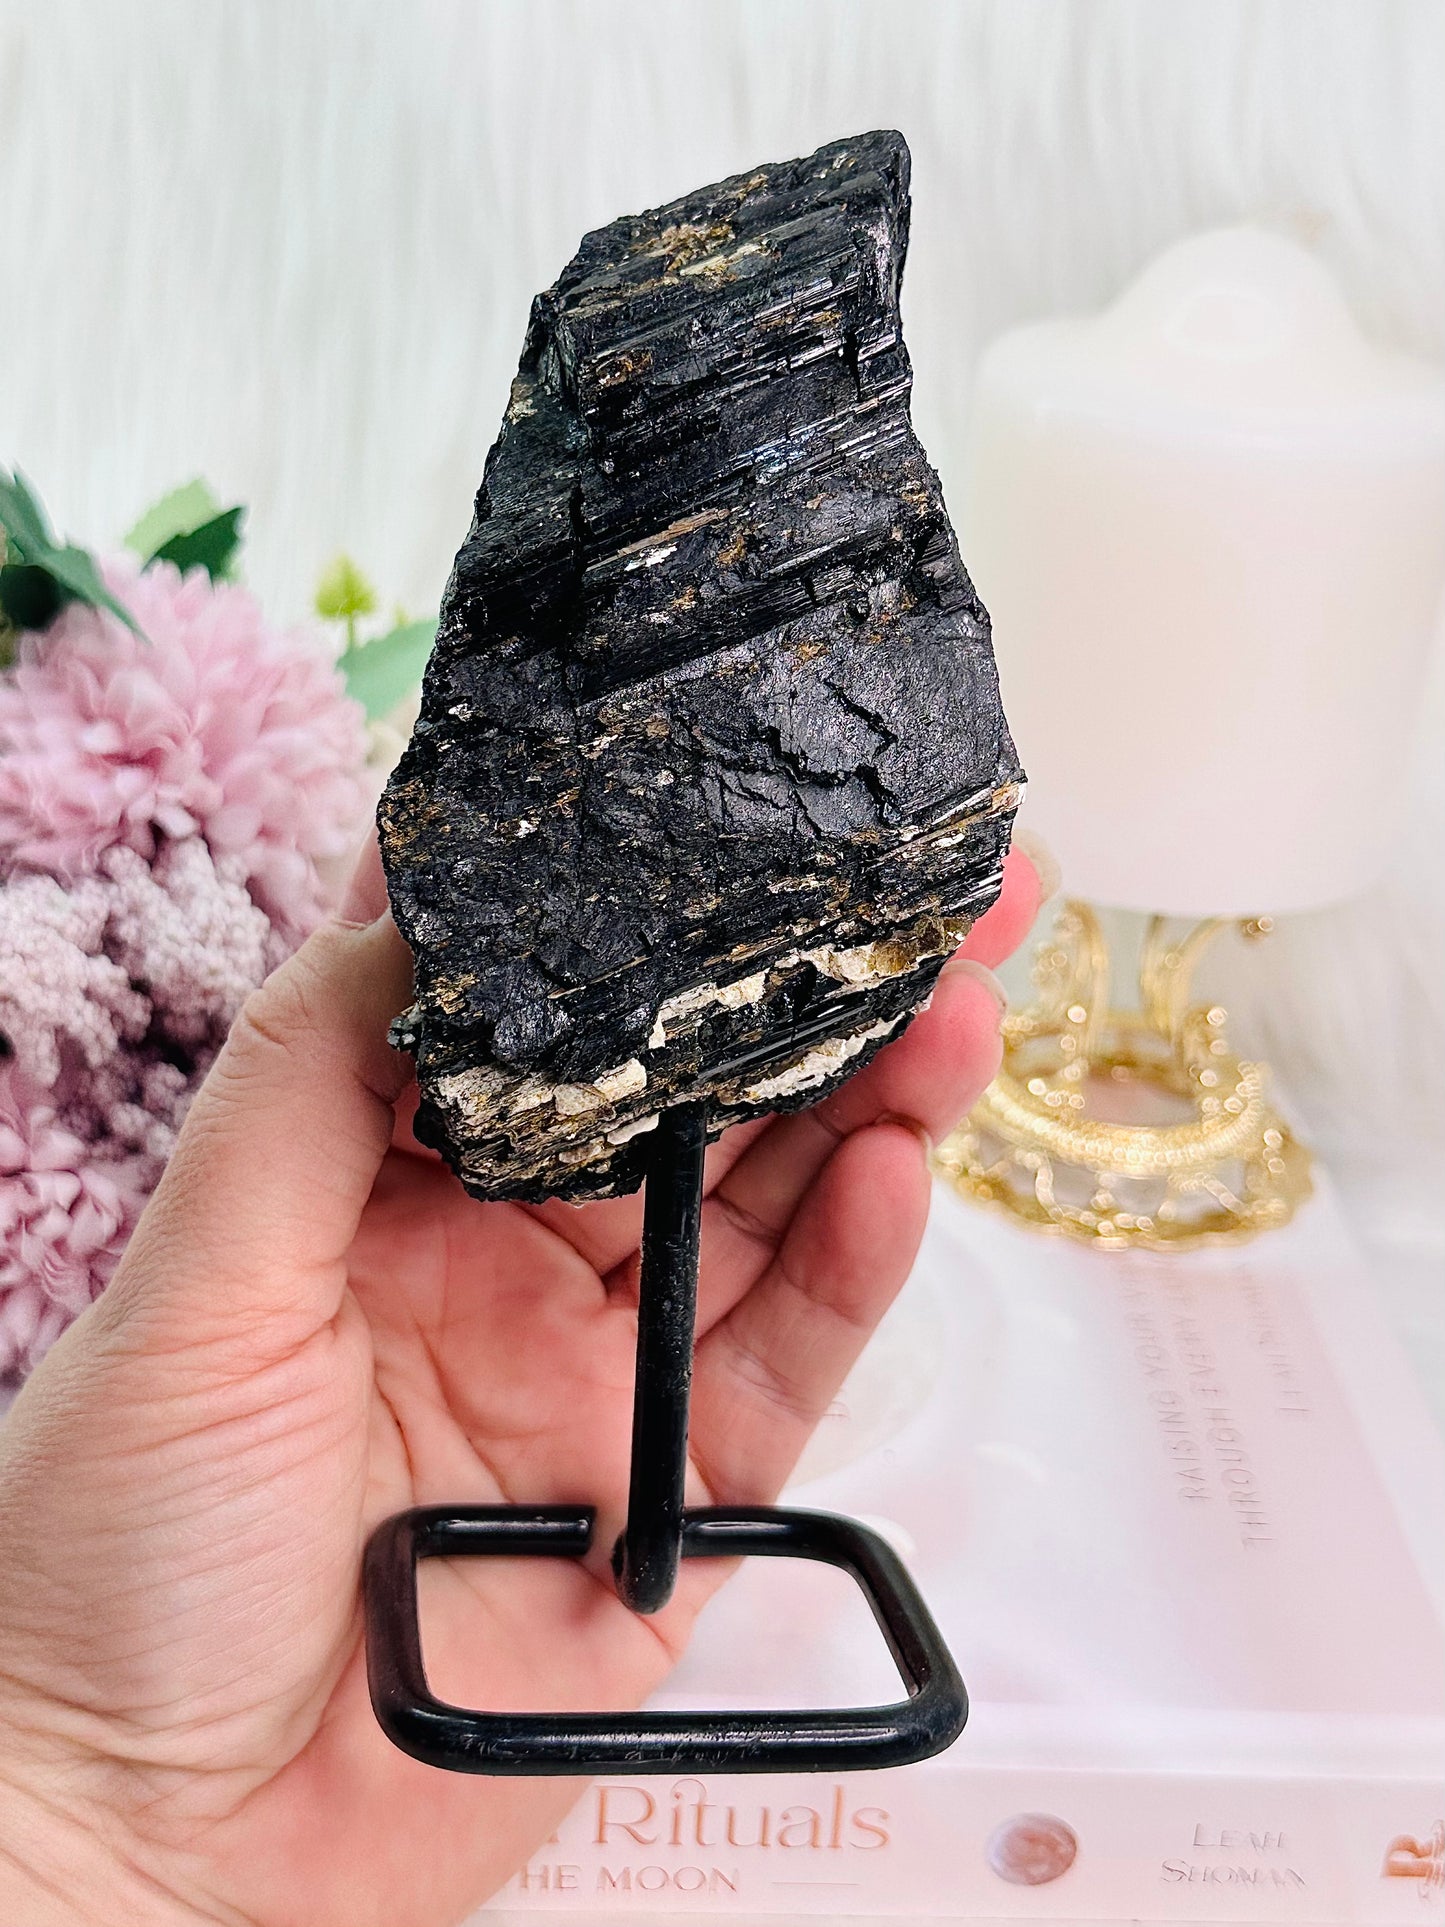 ⚜️ SALE ⚜️ Highly Protective Stone For Your Home ~ Amazing Large Natural Raw Black Tourmaline Specimen On Stand 623grams